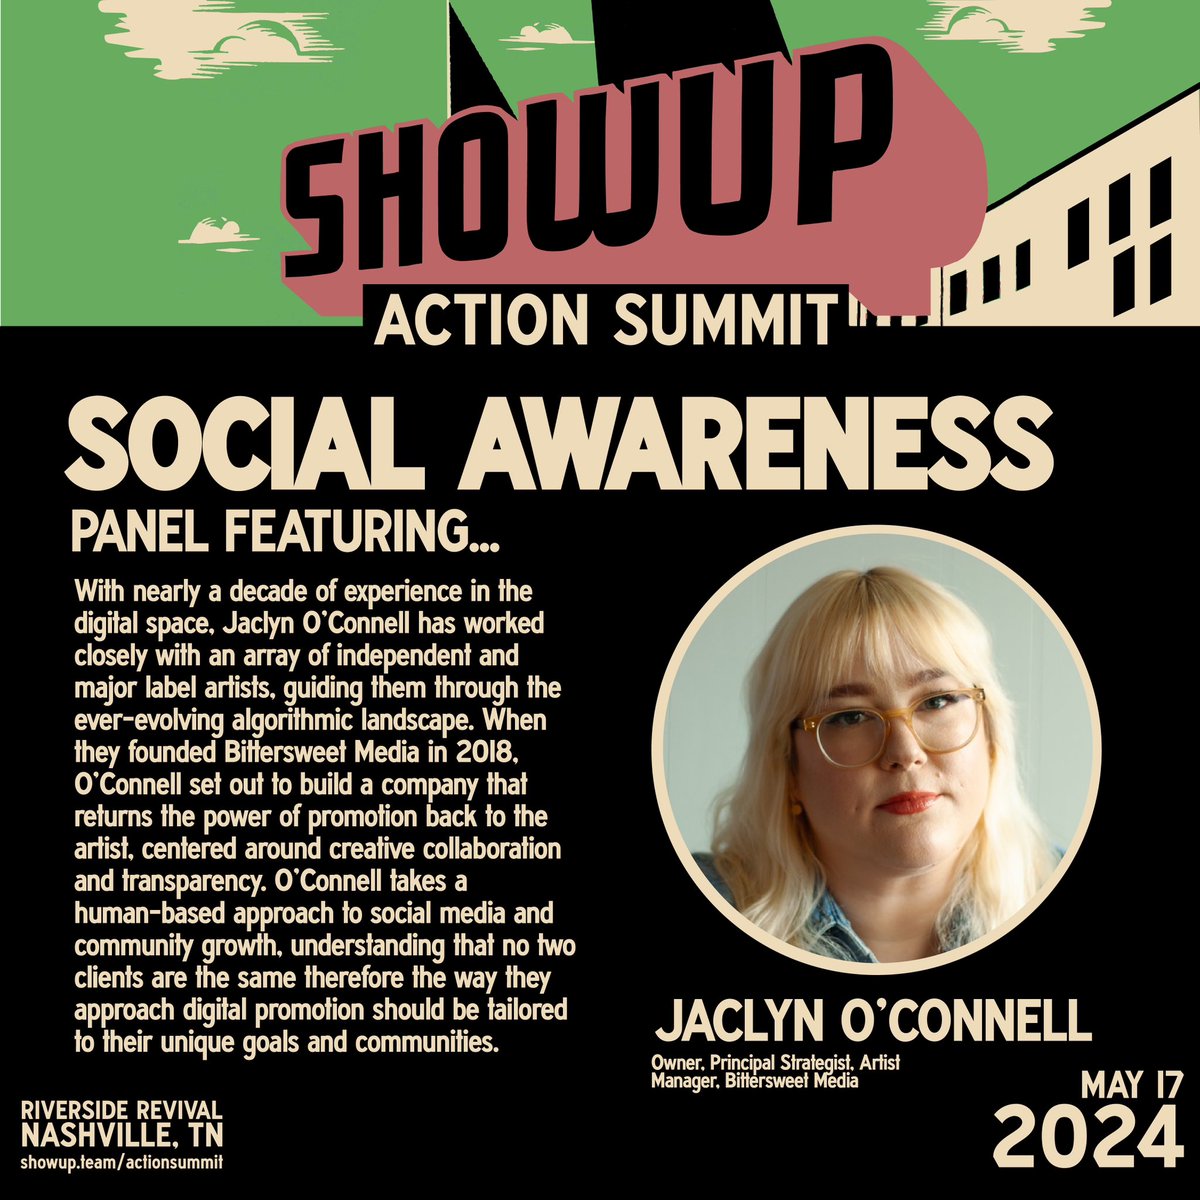 we’re in Nashville for #MusicBiz2024! Bittersweet Media is excited to be represented by @jaclyn_oconnell, speaking @ShowUp_team’s first ever #ShowUpActionSummit this Friday, May 17th!